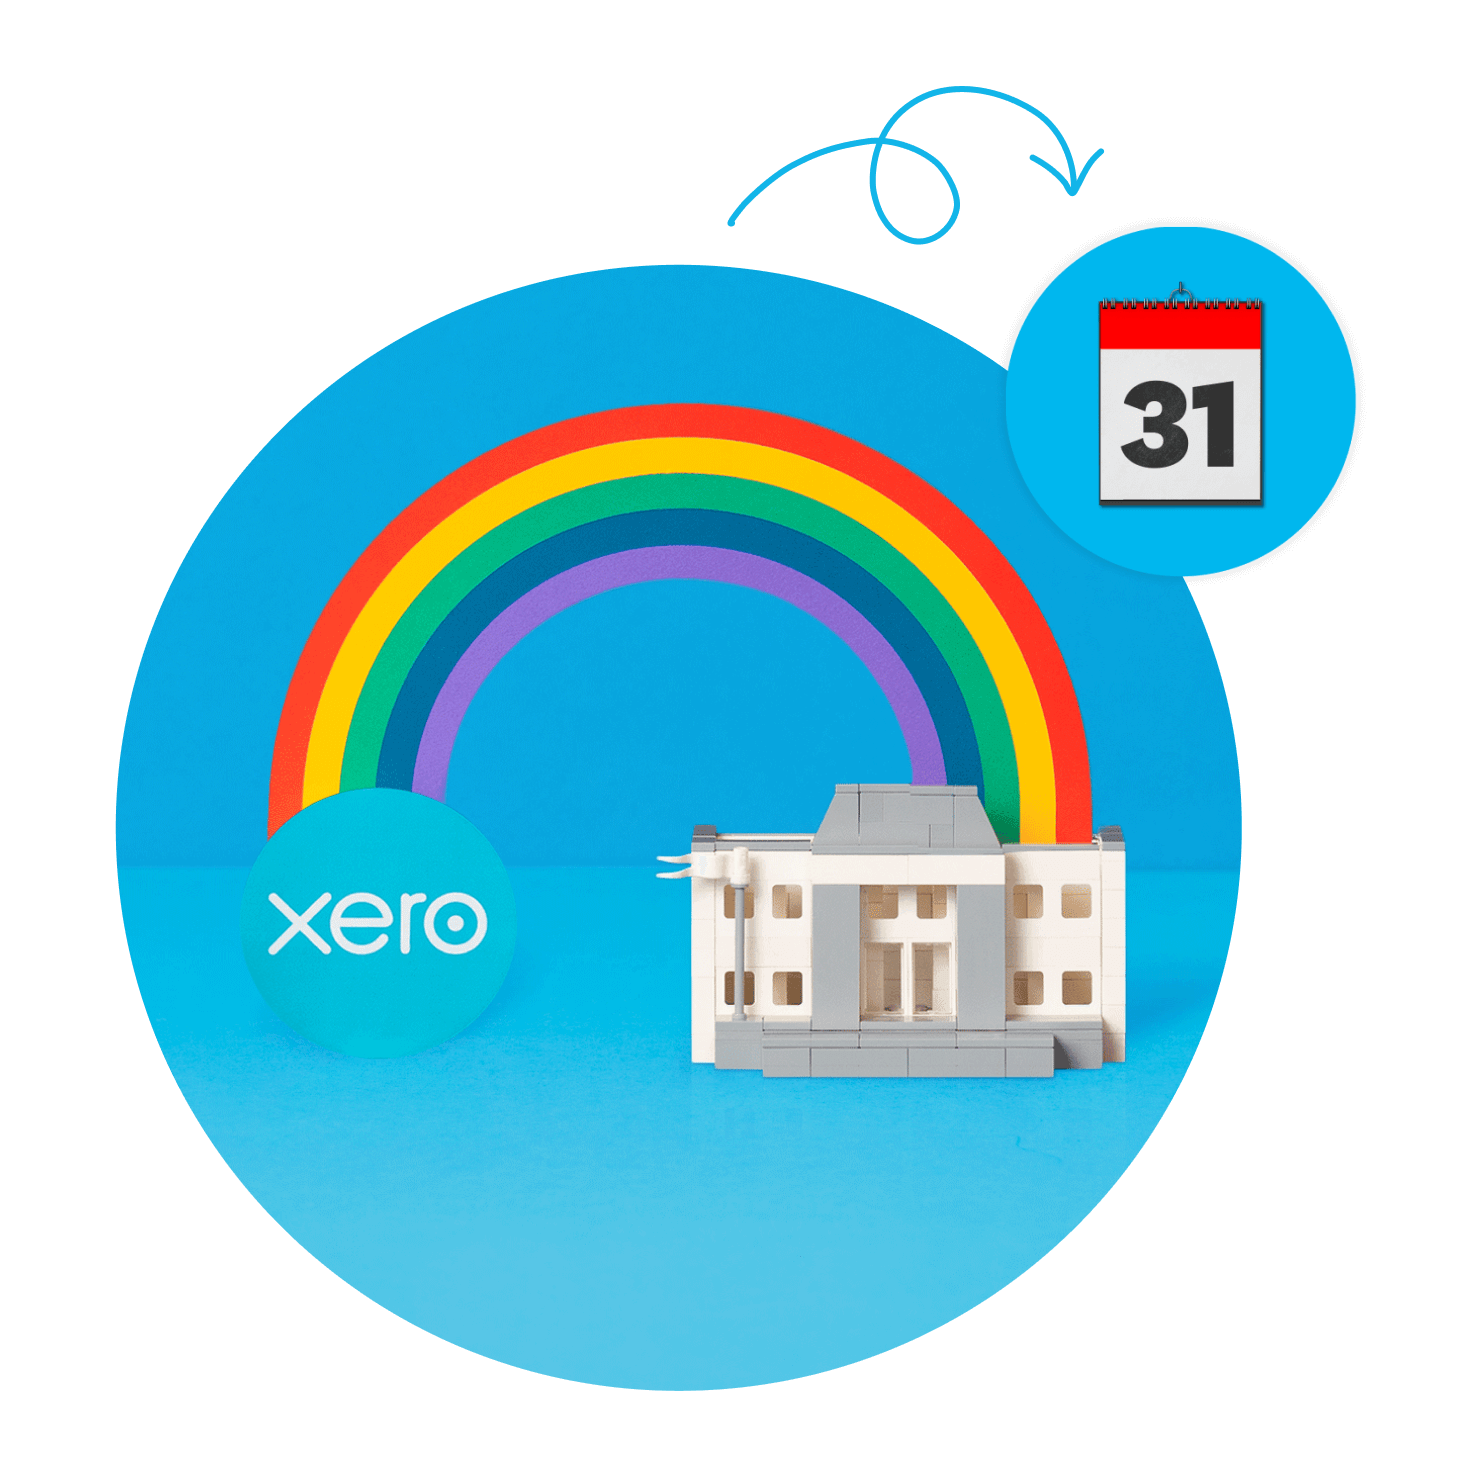 Xero has e-invoicing built in, so you’re ready to send e-invoices to the Singapore government agencies you do business with.